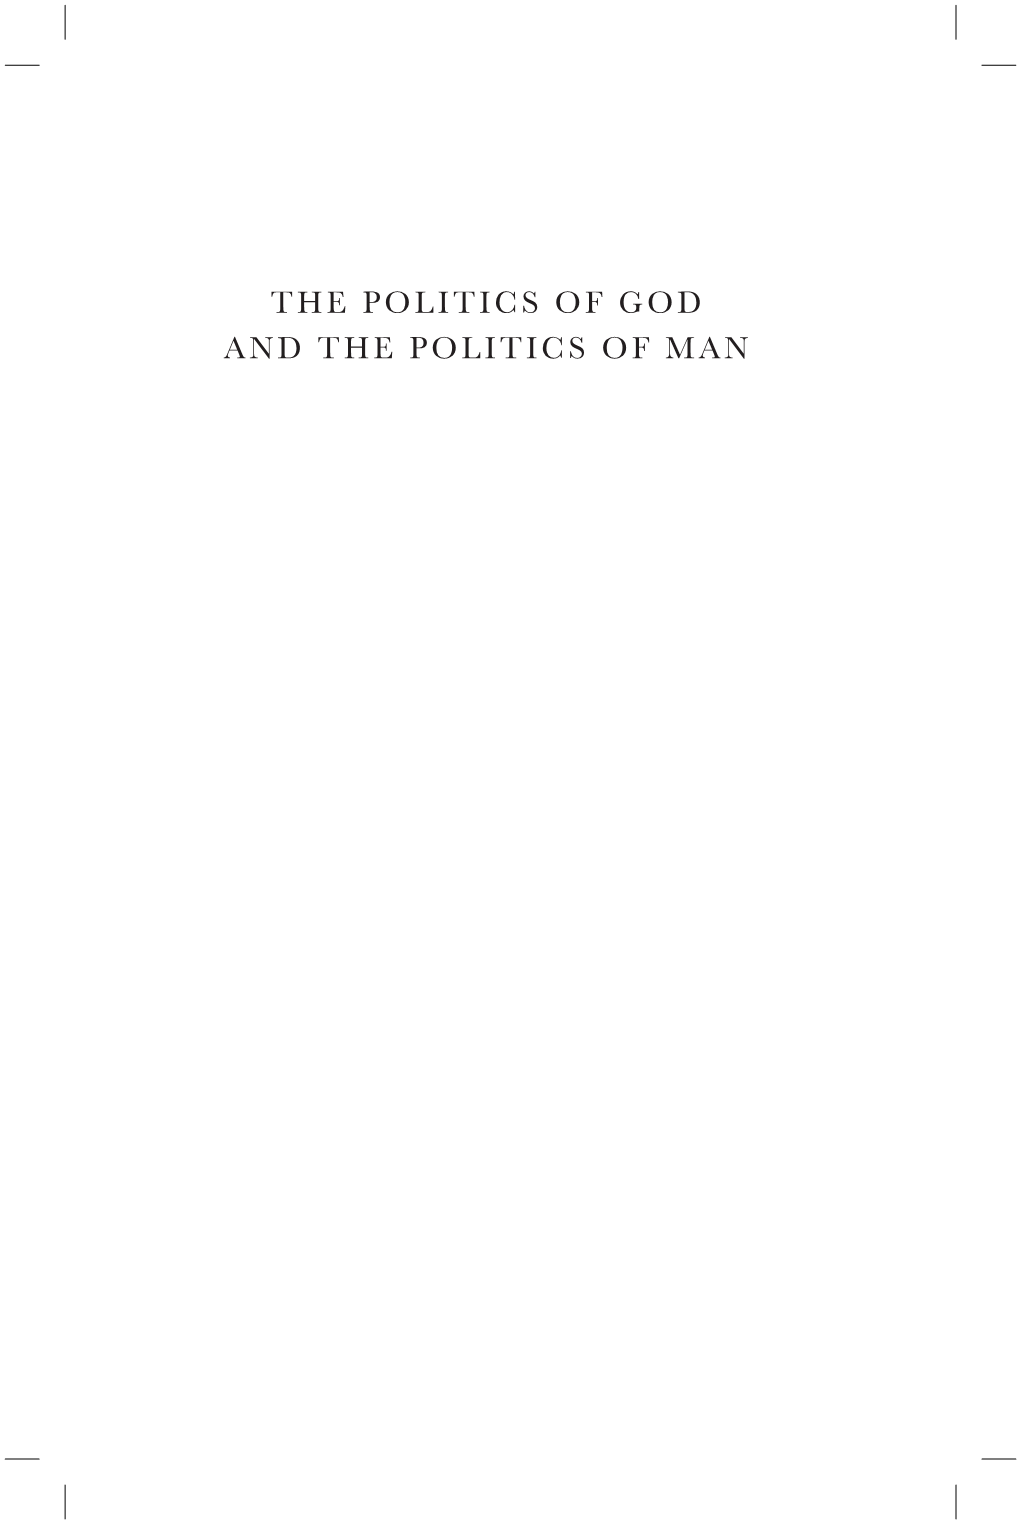 The Politics of God and the Politics Of